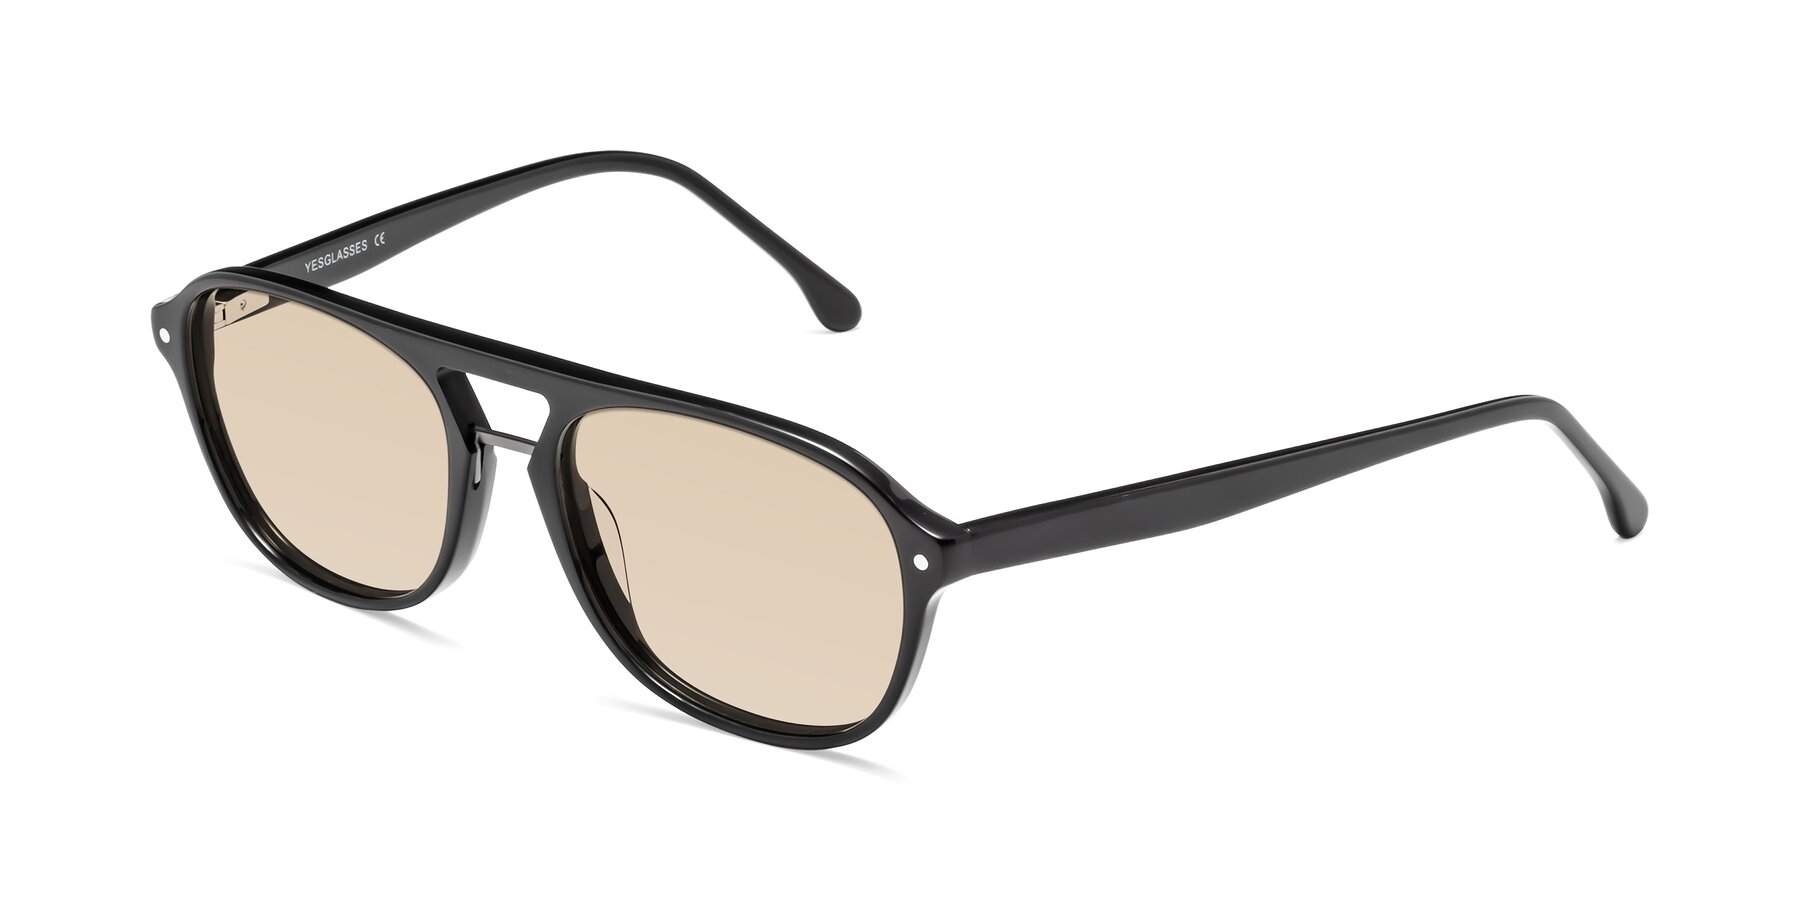 Angle of 17416 in Black with Light Brown Tinted Lenses